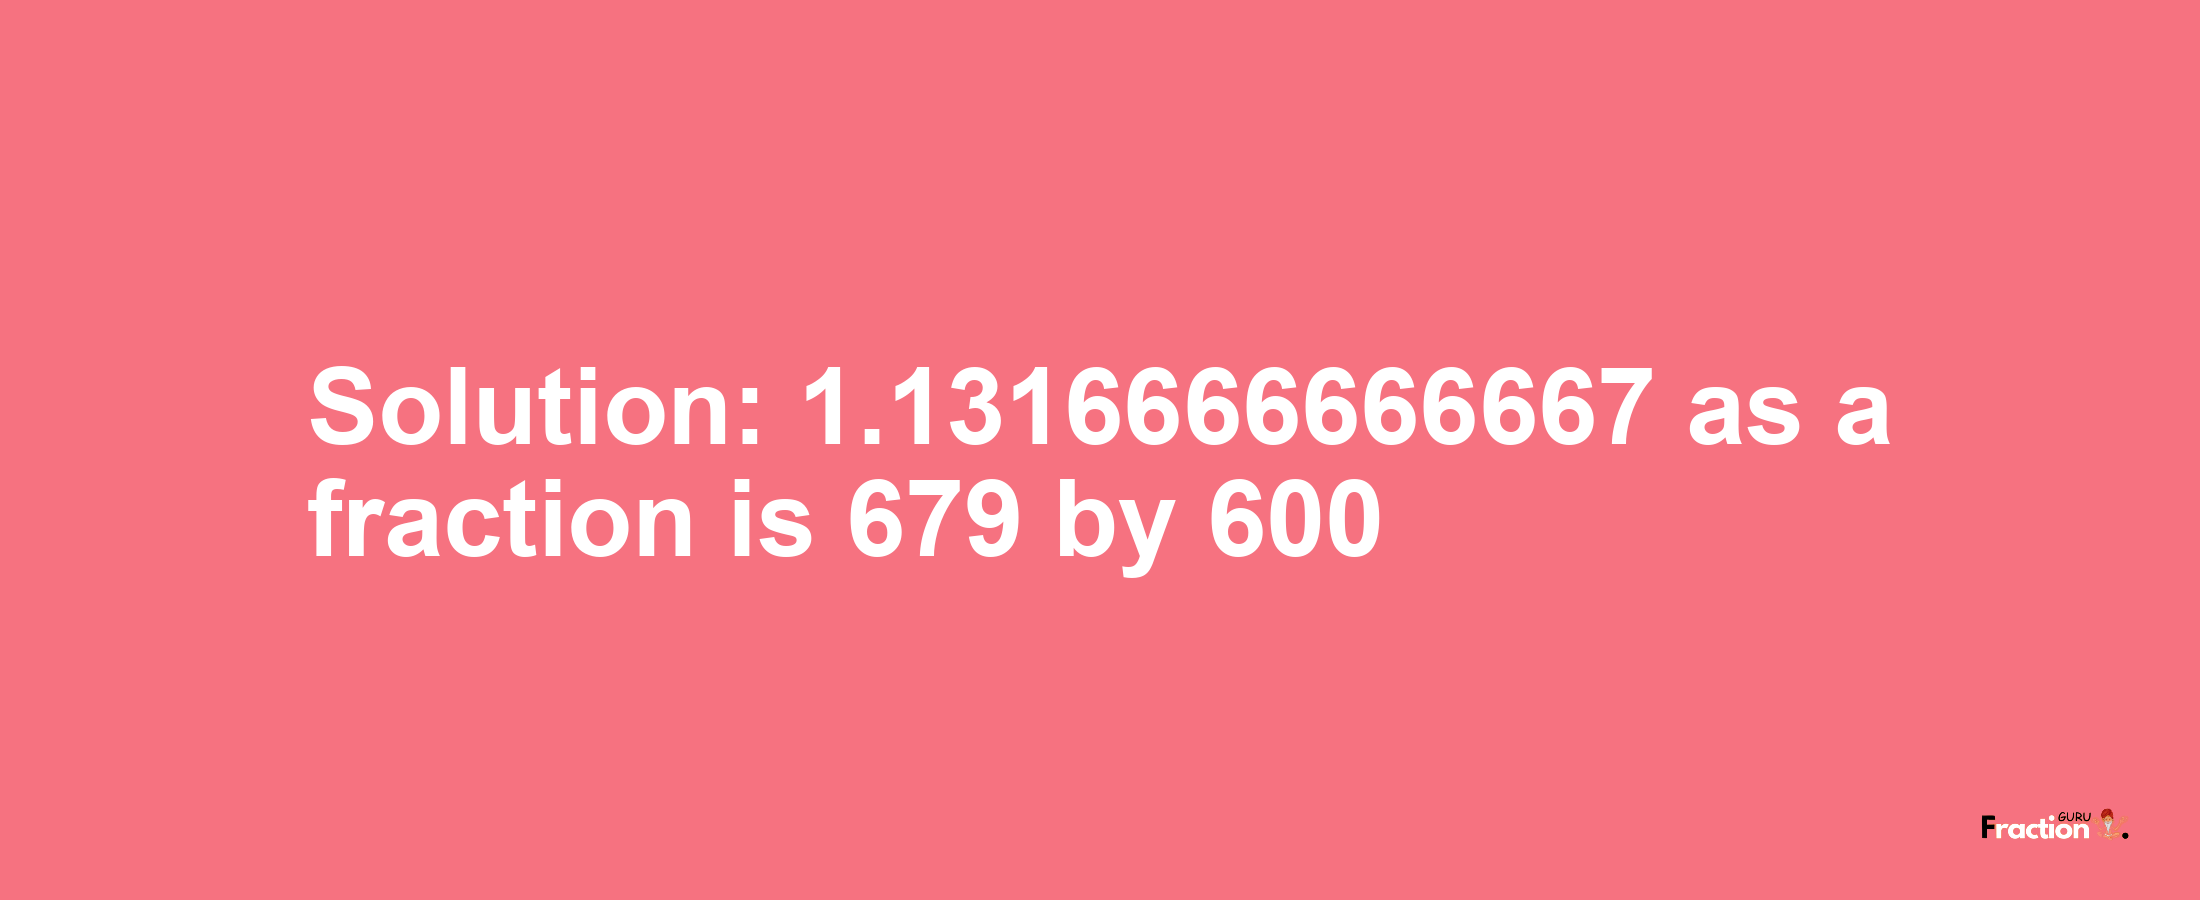 Solution:1.1316666666667 as a fraction is 679/600